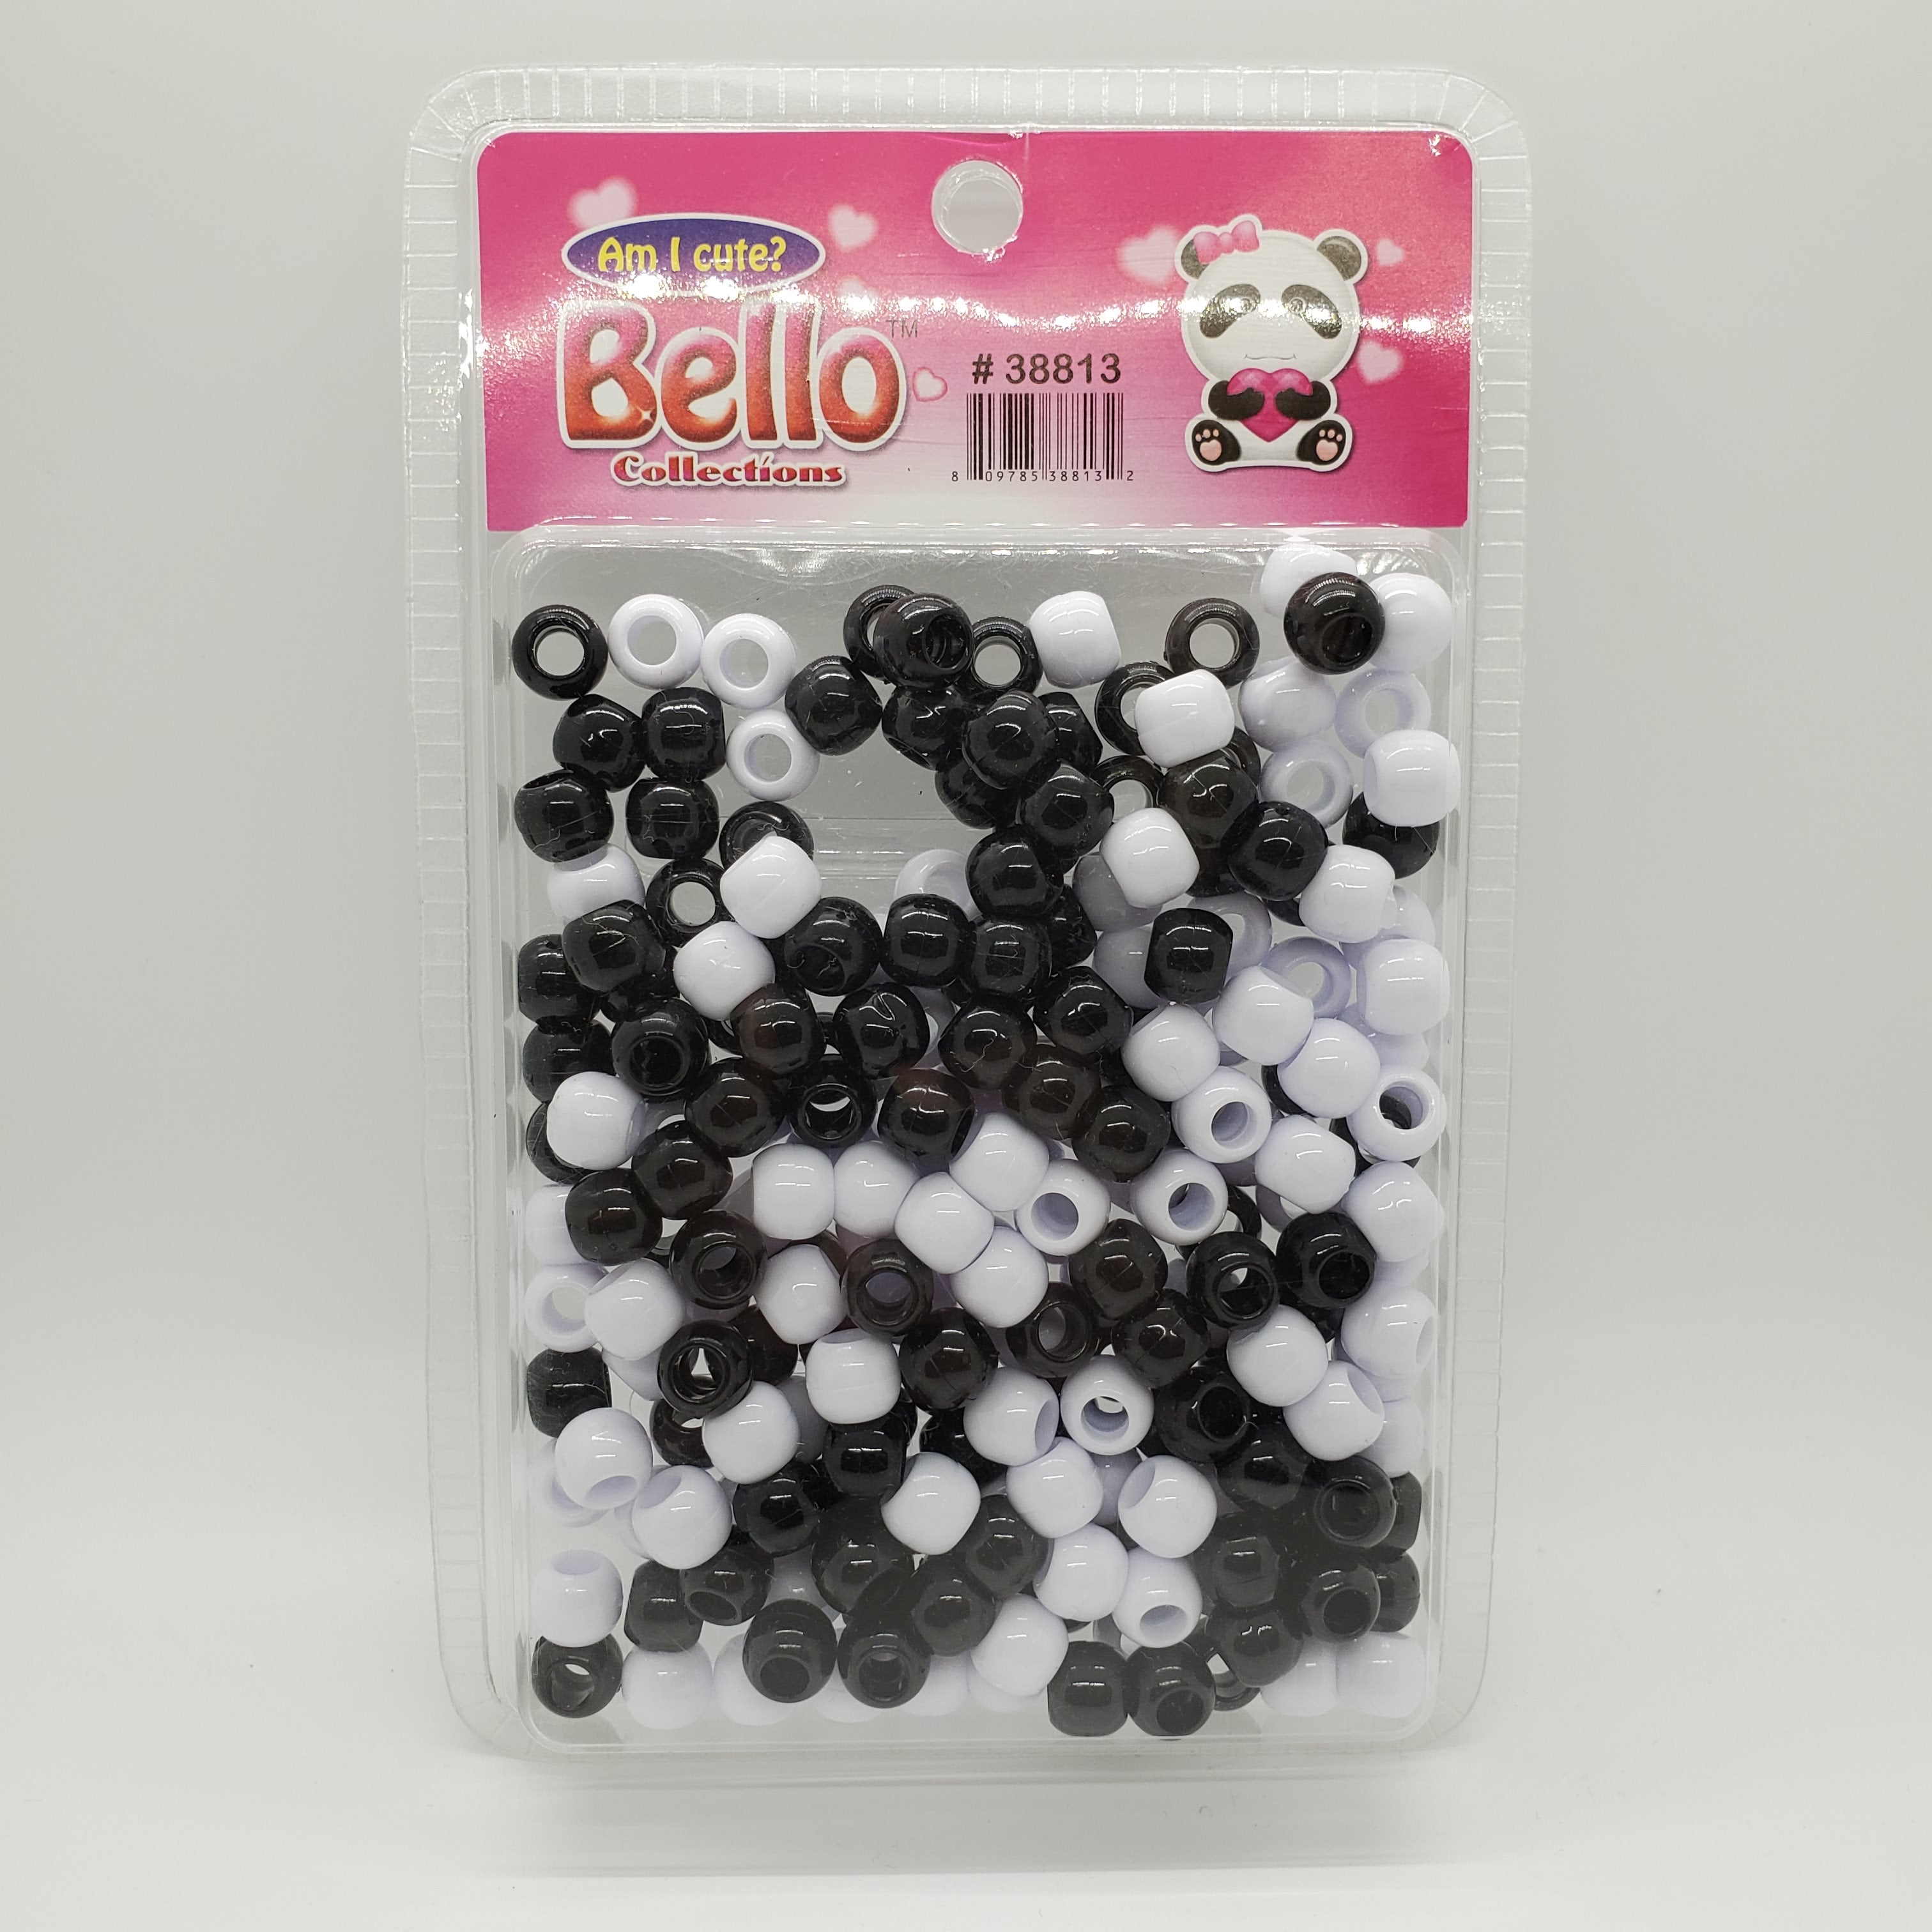 Bello Collections Jumbo Beads Black/White #38813 - Beauty Bar & Supply